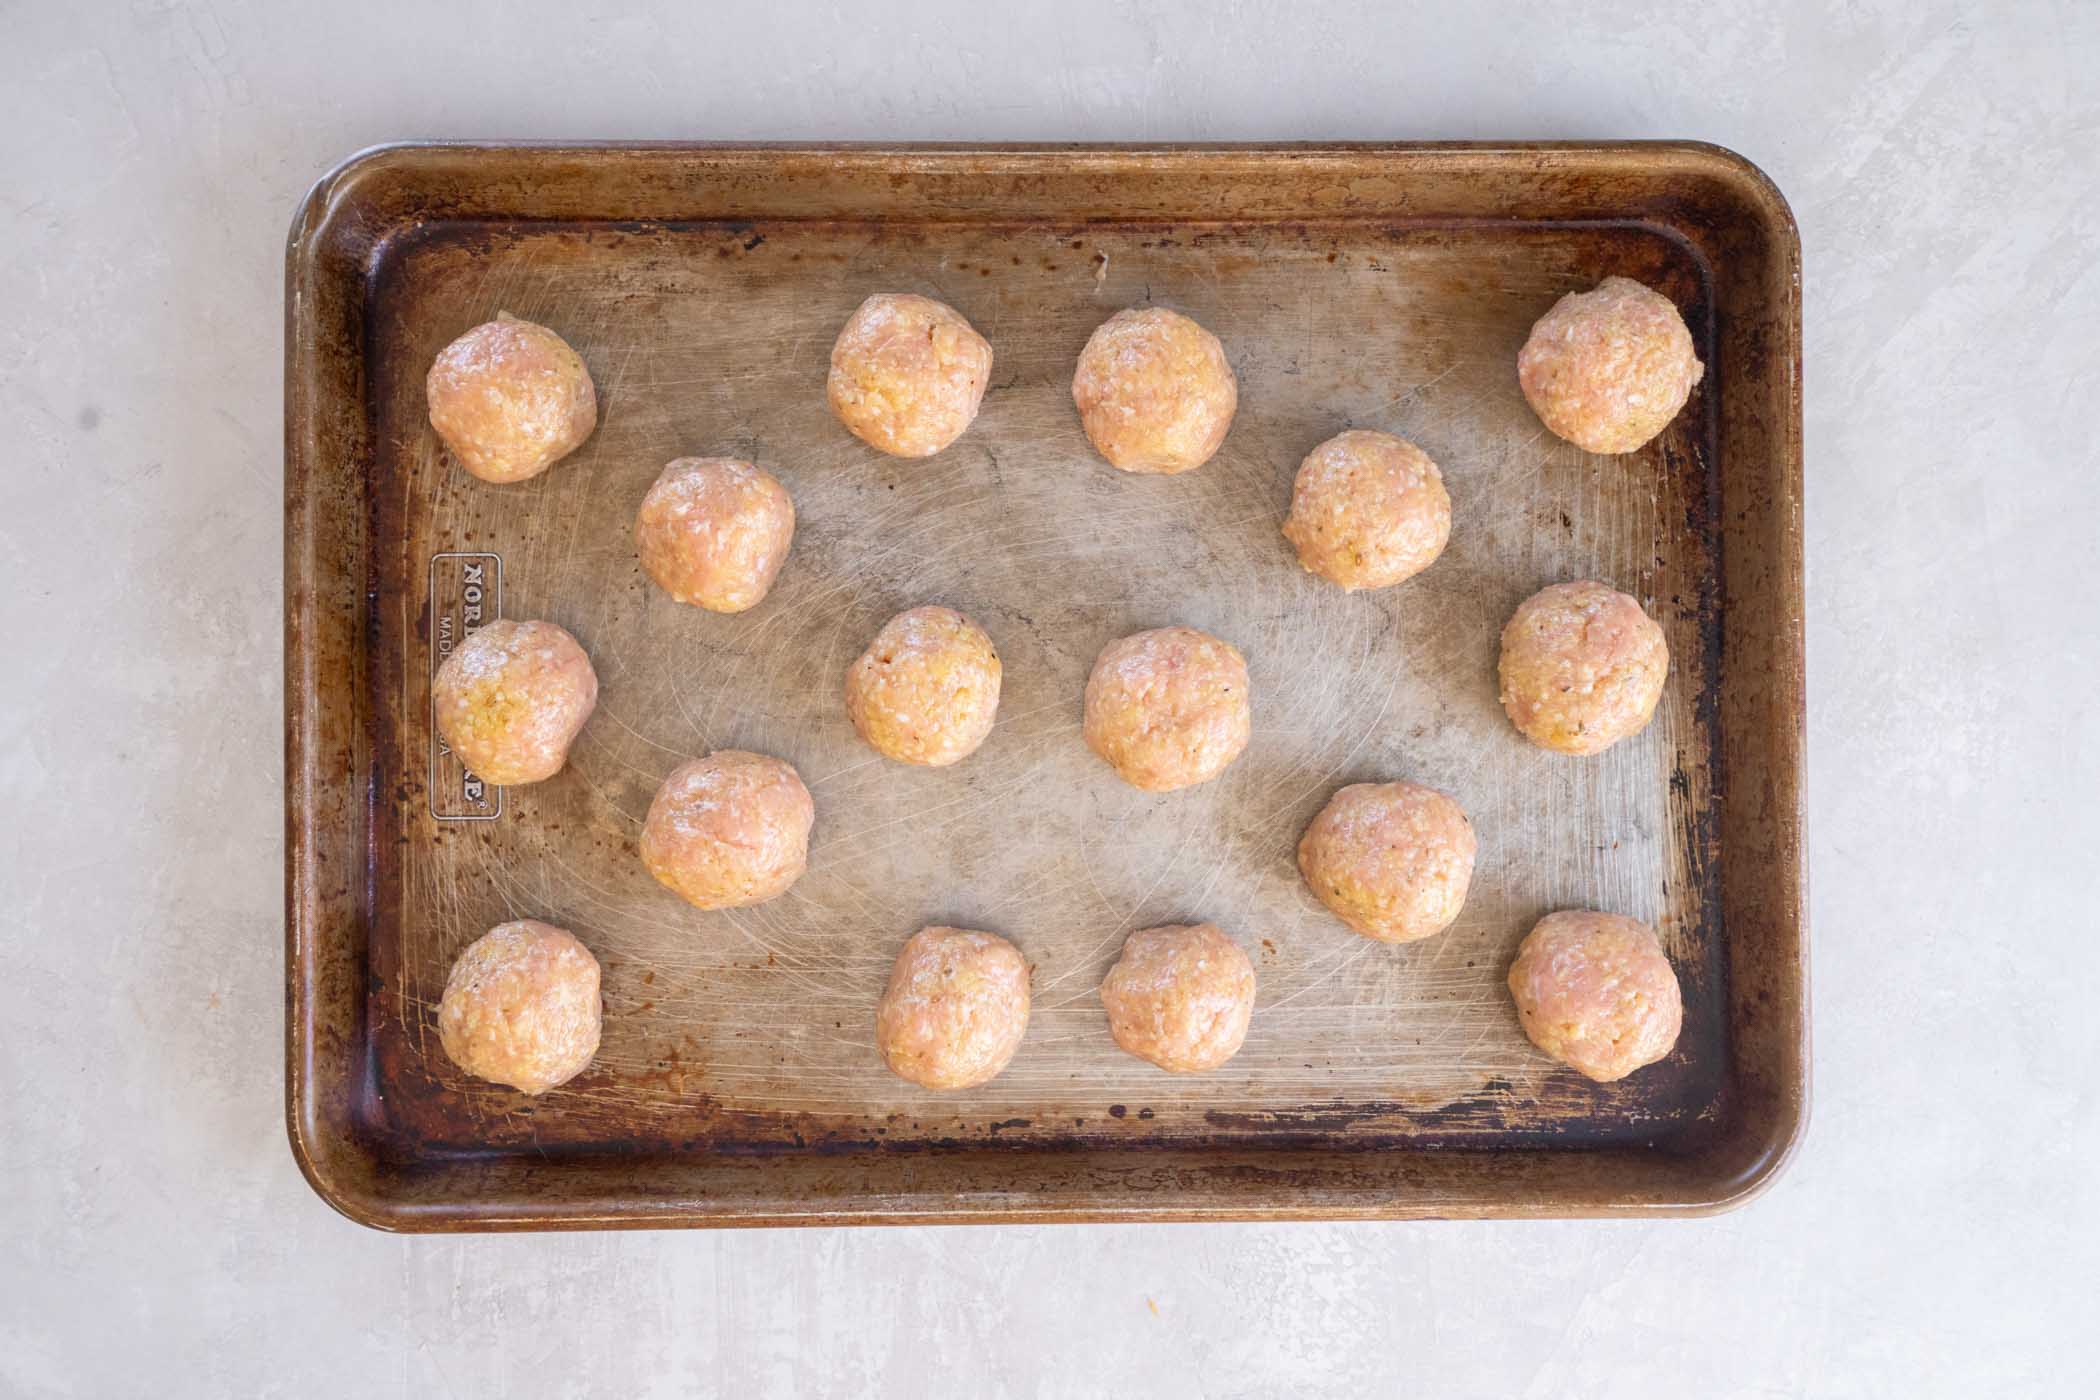 Unbaked chicken meatballs on a greased baking sheet.